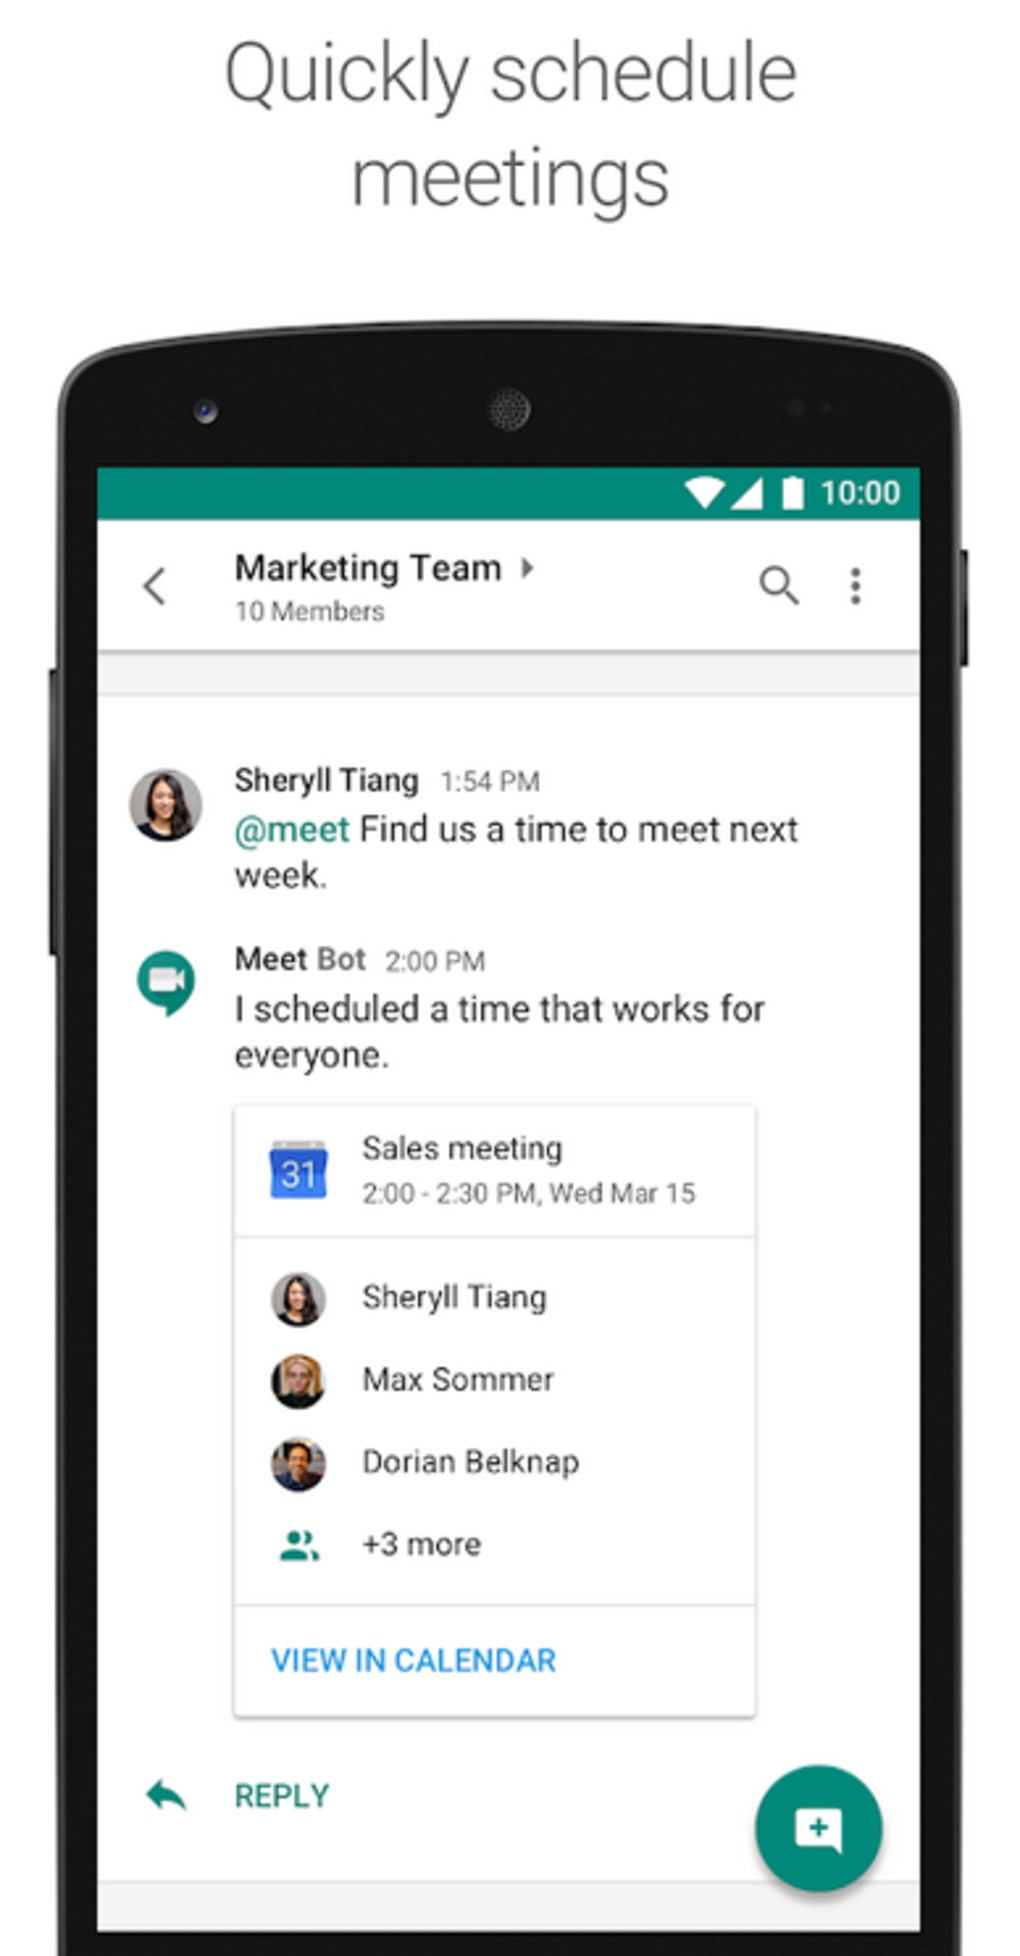 Online Chat - Apps on Google Play